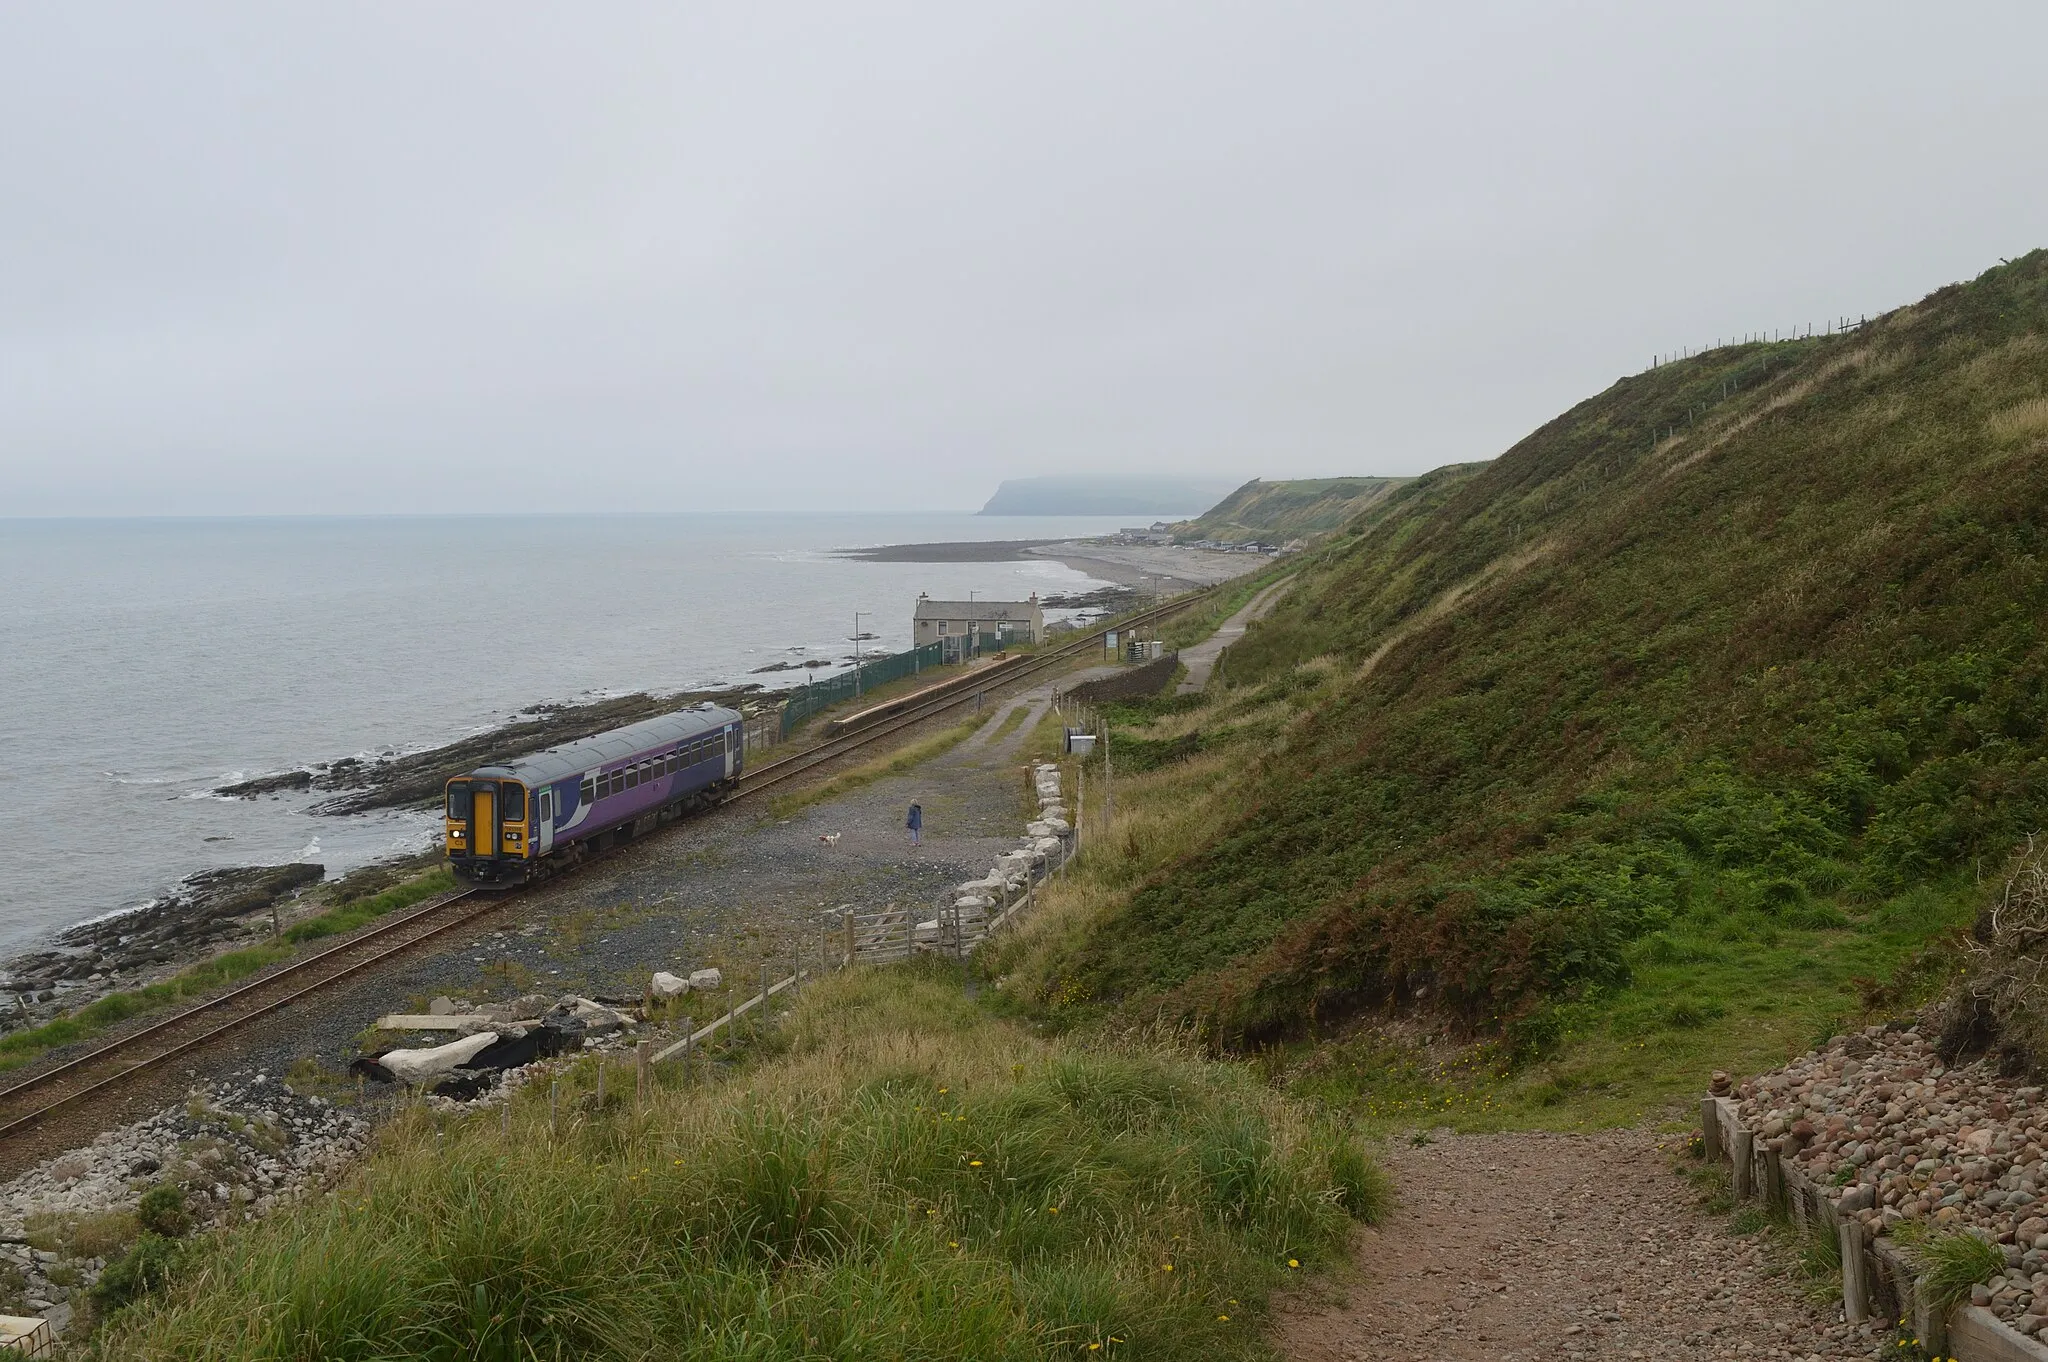 Photo showing: A somewhat overcast afternoon on the scenic Cumbrian Coast route sees Northern owned 153.359 on 2C46, 12.08 Carlisle to Barrow-in-Furness. Date taken = 18 July 2016.